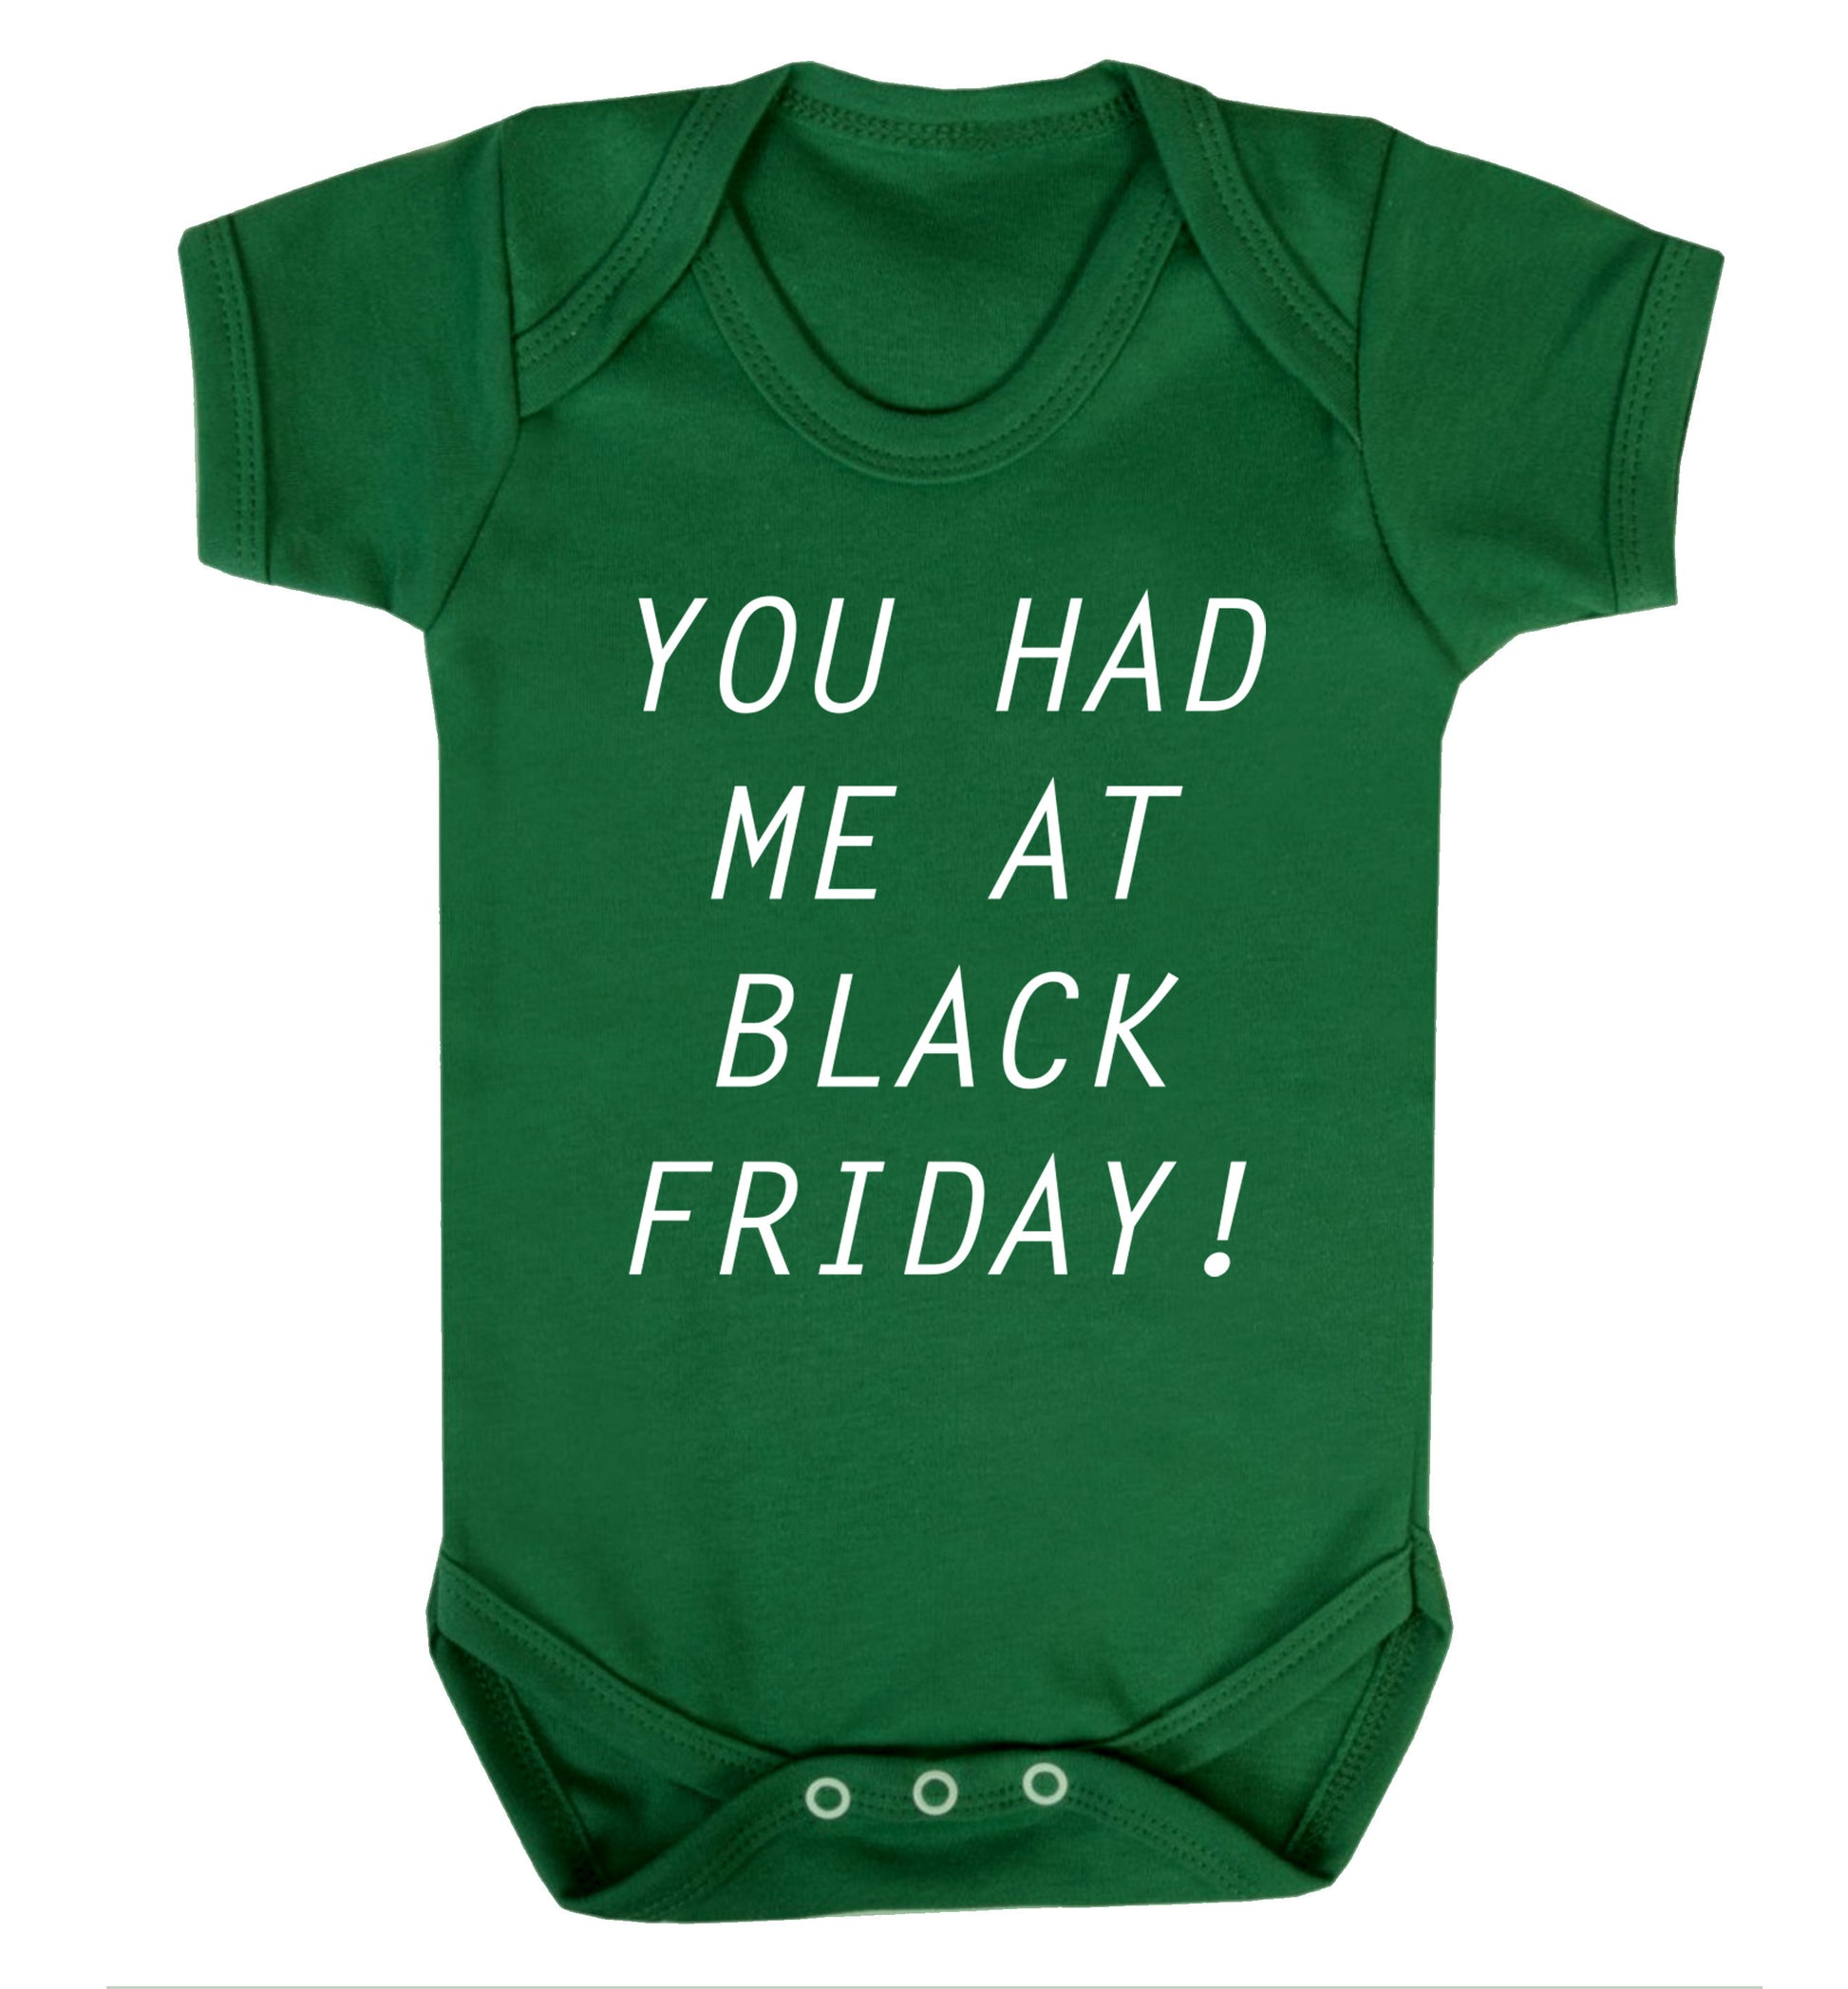 You had me at black friday Baby Vest green 18-24 months